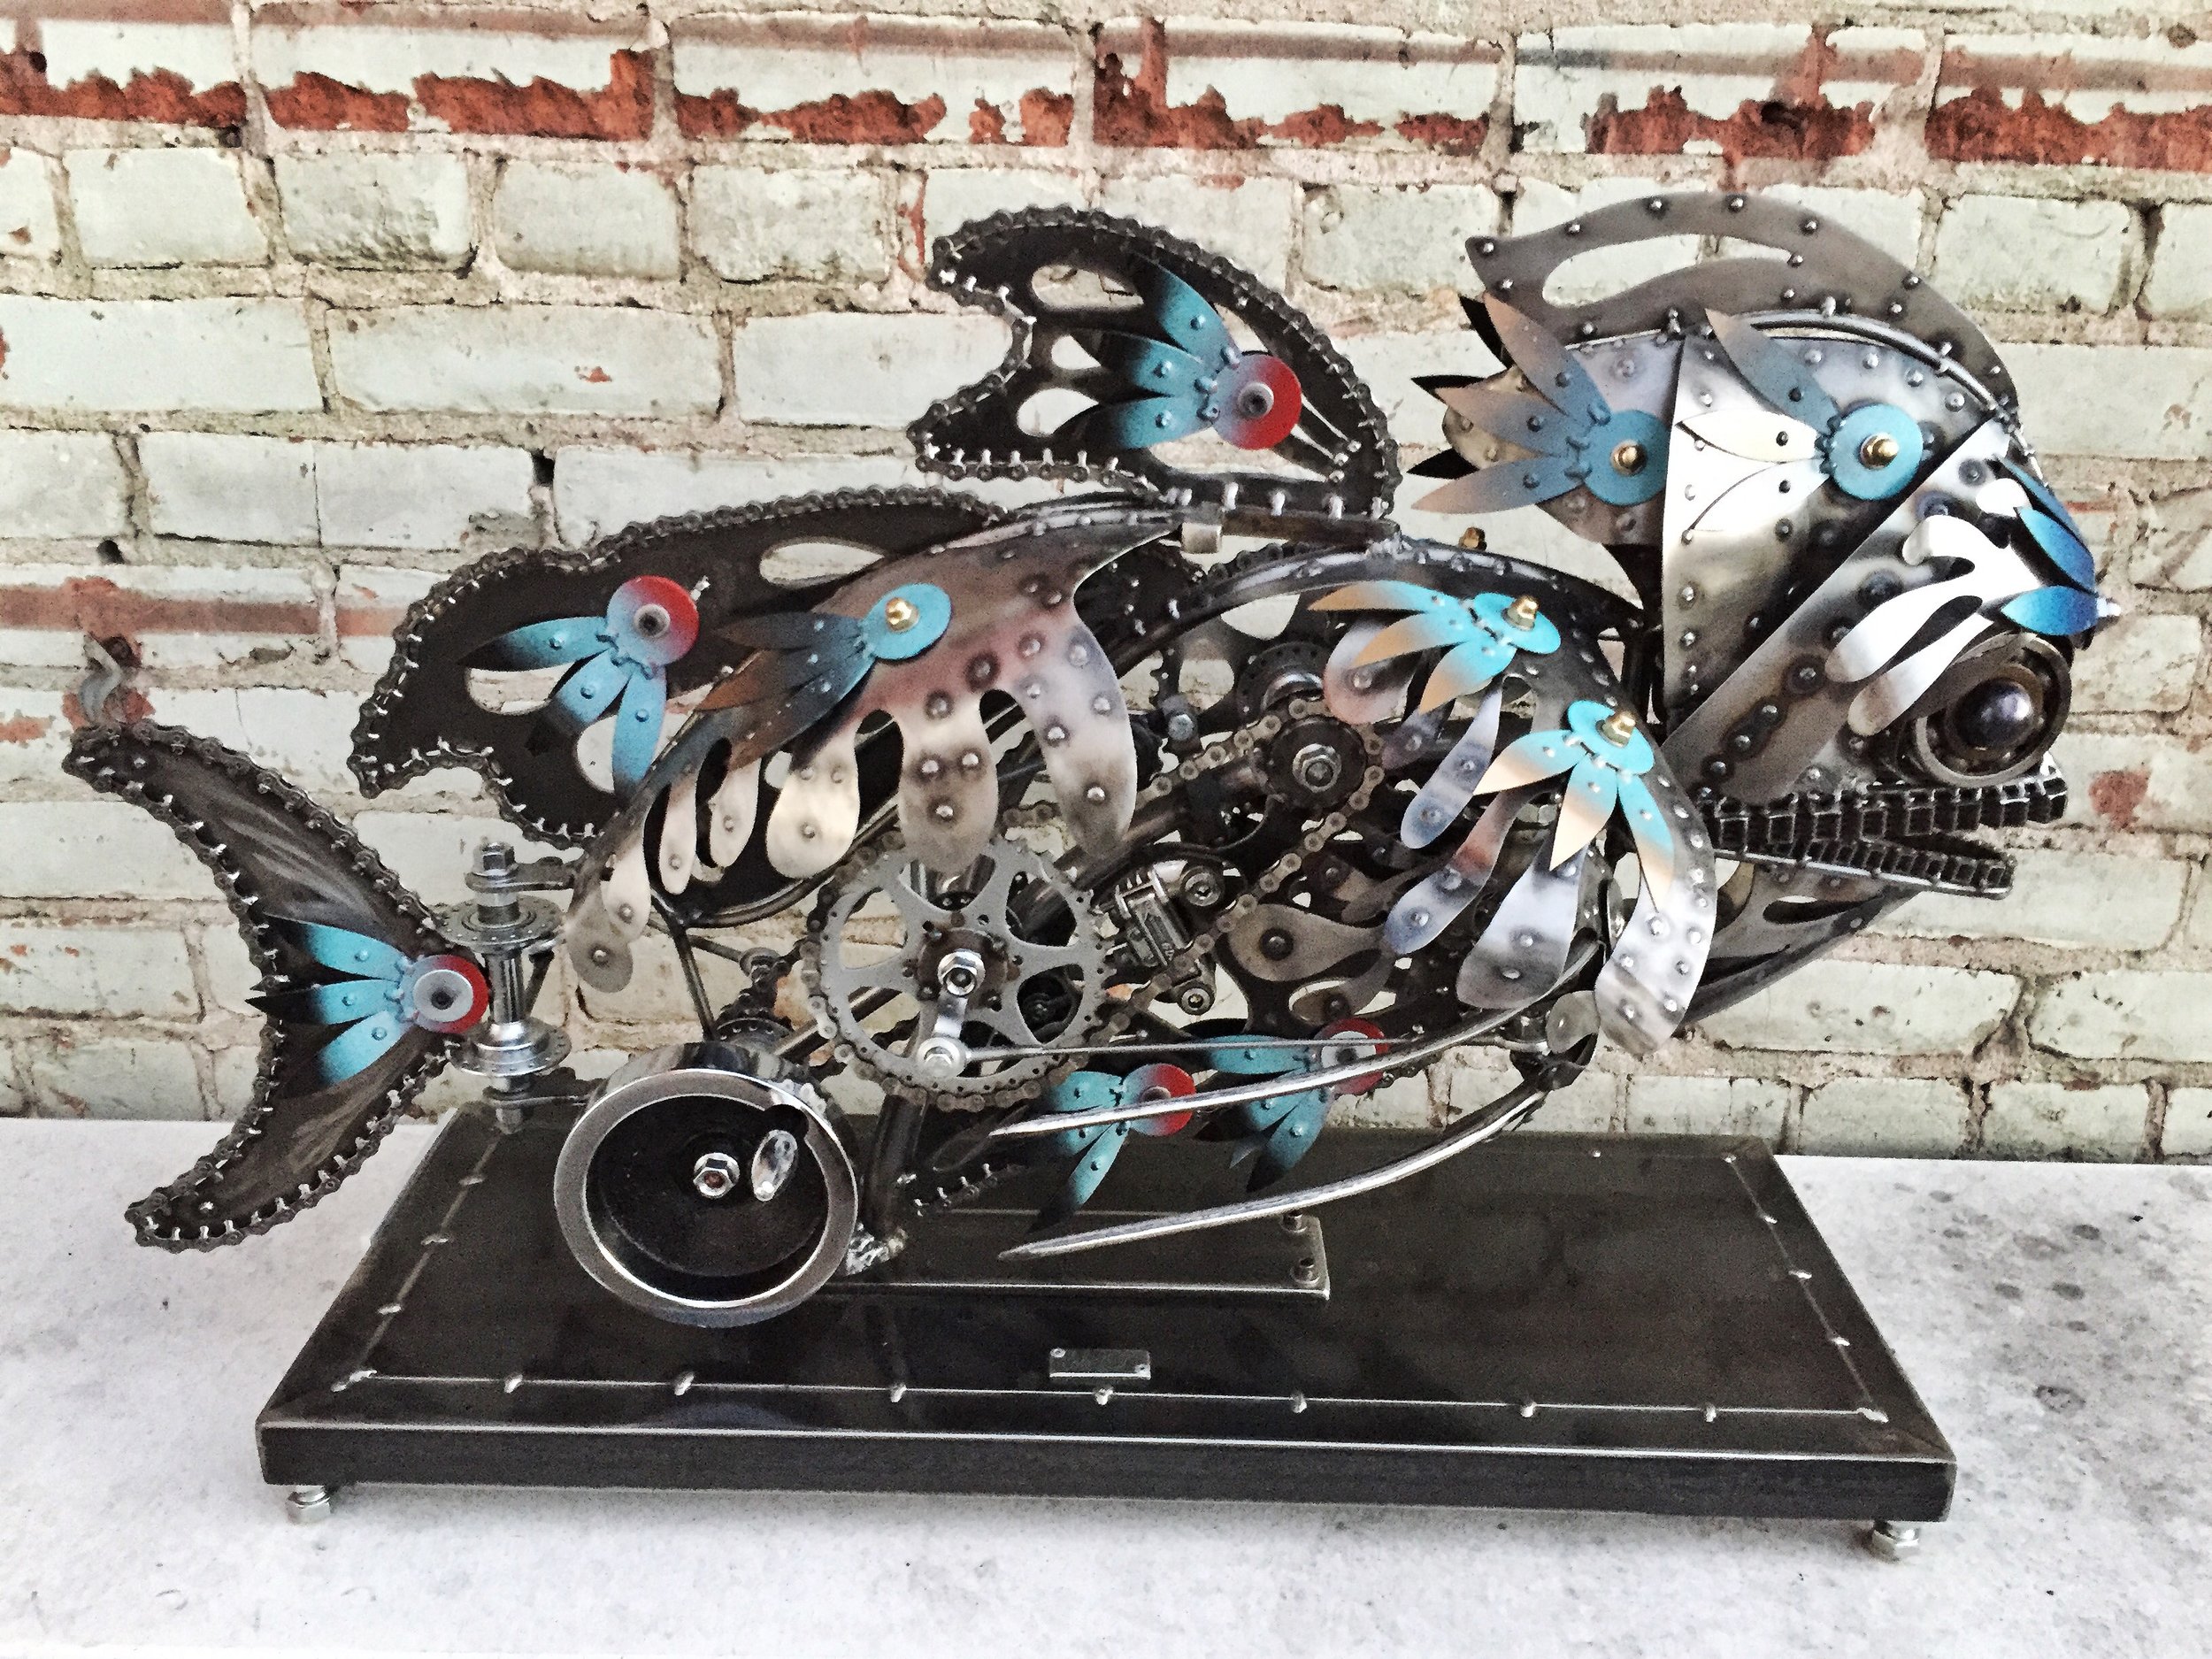 Ivan Kinetic Sculpture of a Fish by Chris Cole 001